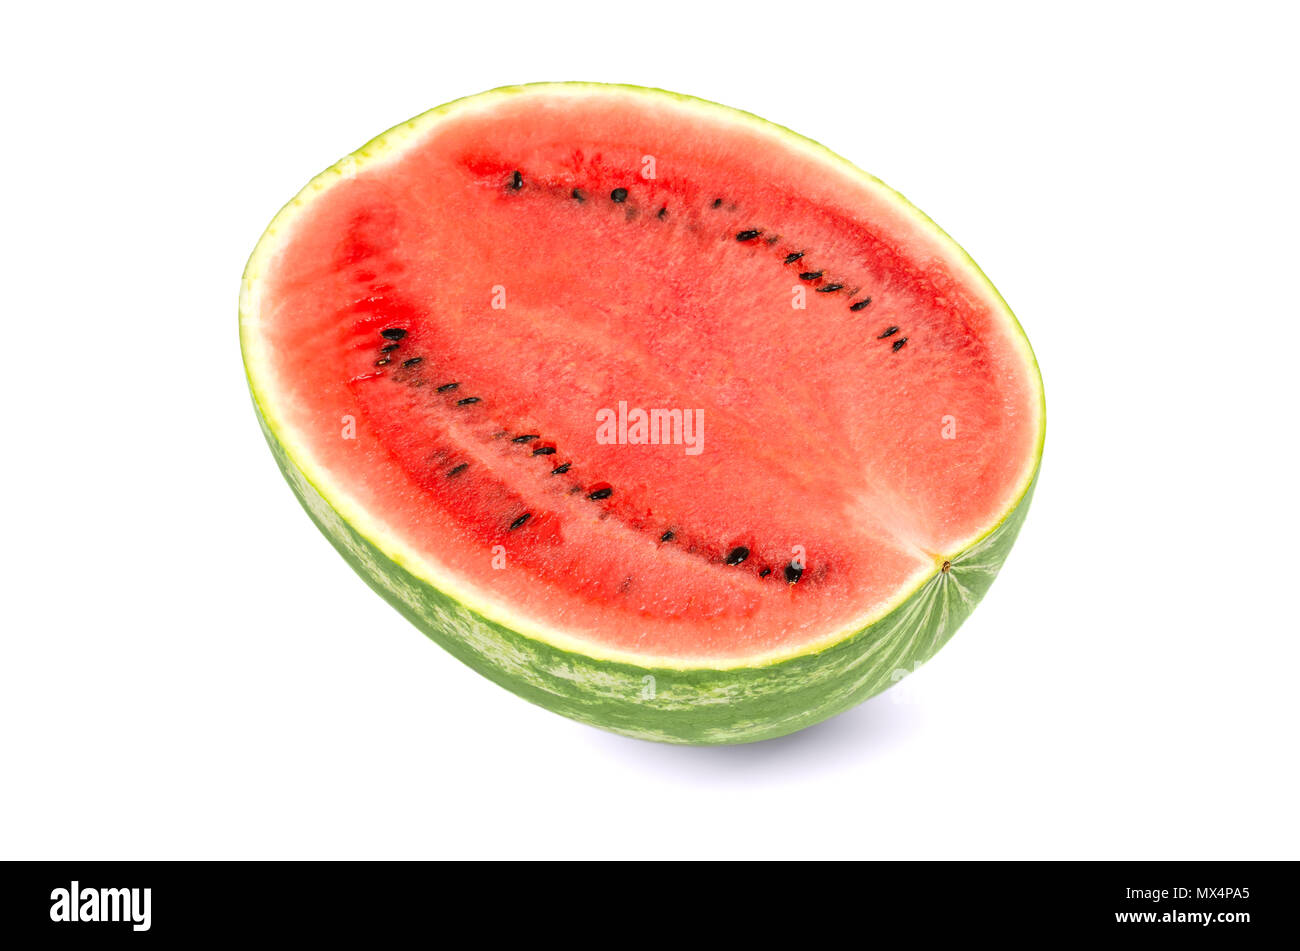 Sweet watermelon half, front view, on white background. Large ripe fruit of Citrullus lanatus with green striped skin, red pulp and black seeds. Stock Photo